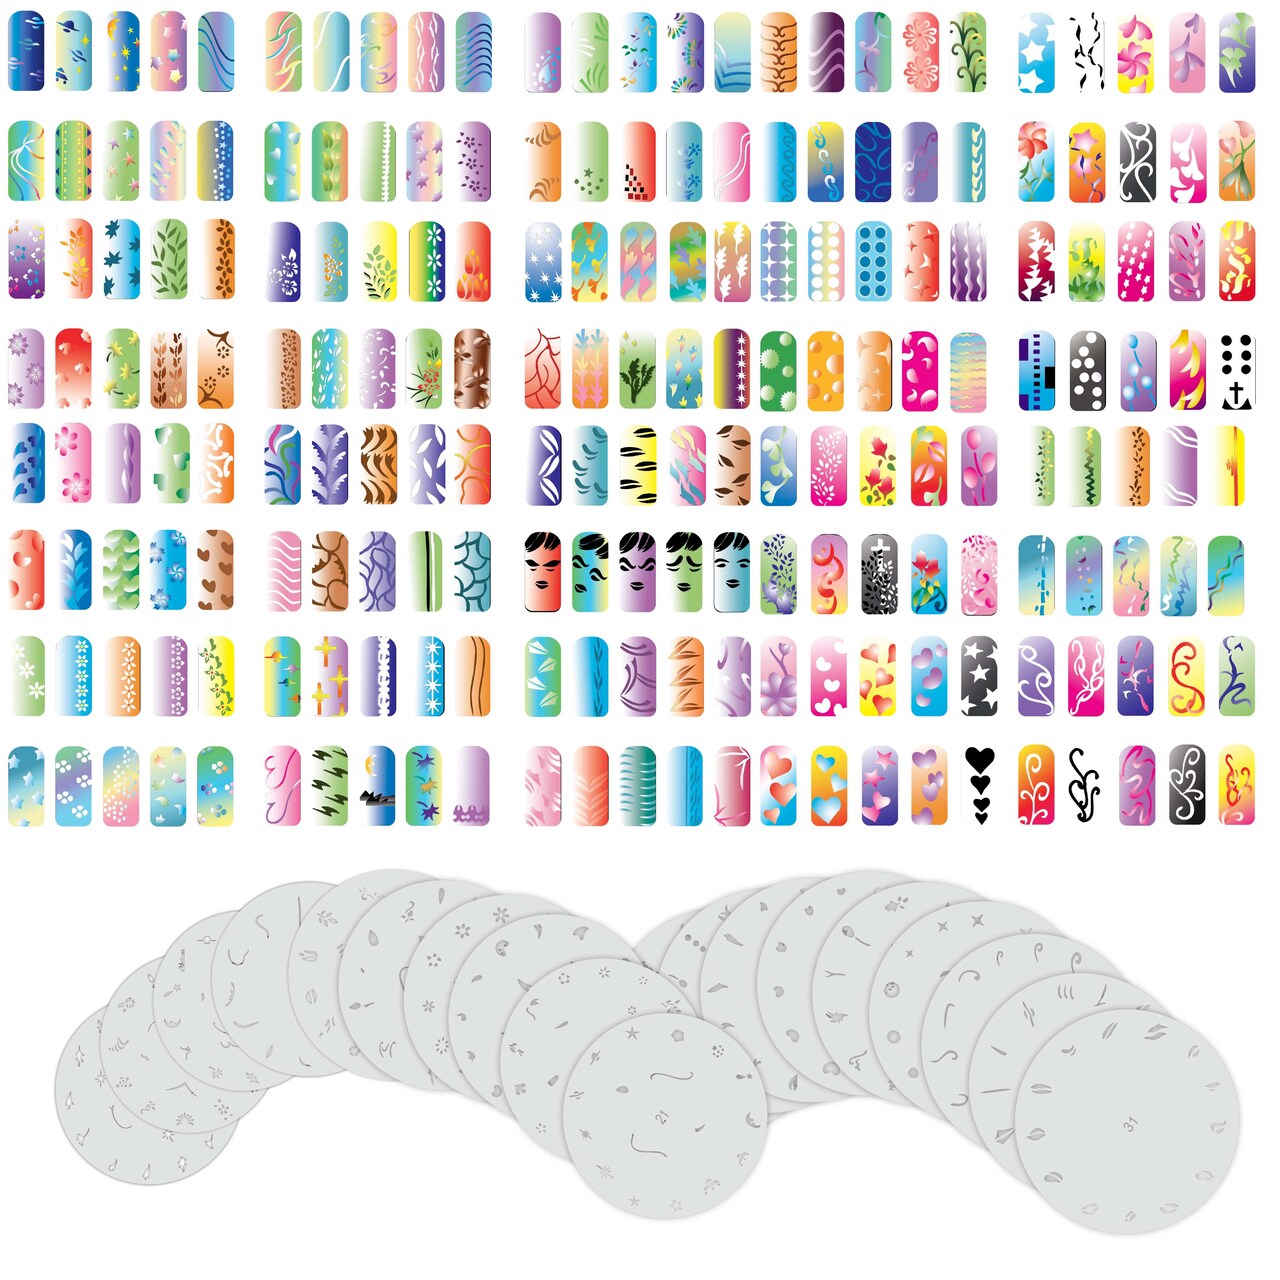 Airbrush Nail Stencils - Design Series Set # 2 Includes 20 Individual Nail  Templates with 16 Designs each for a total 320 Designs of Series #2